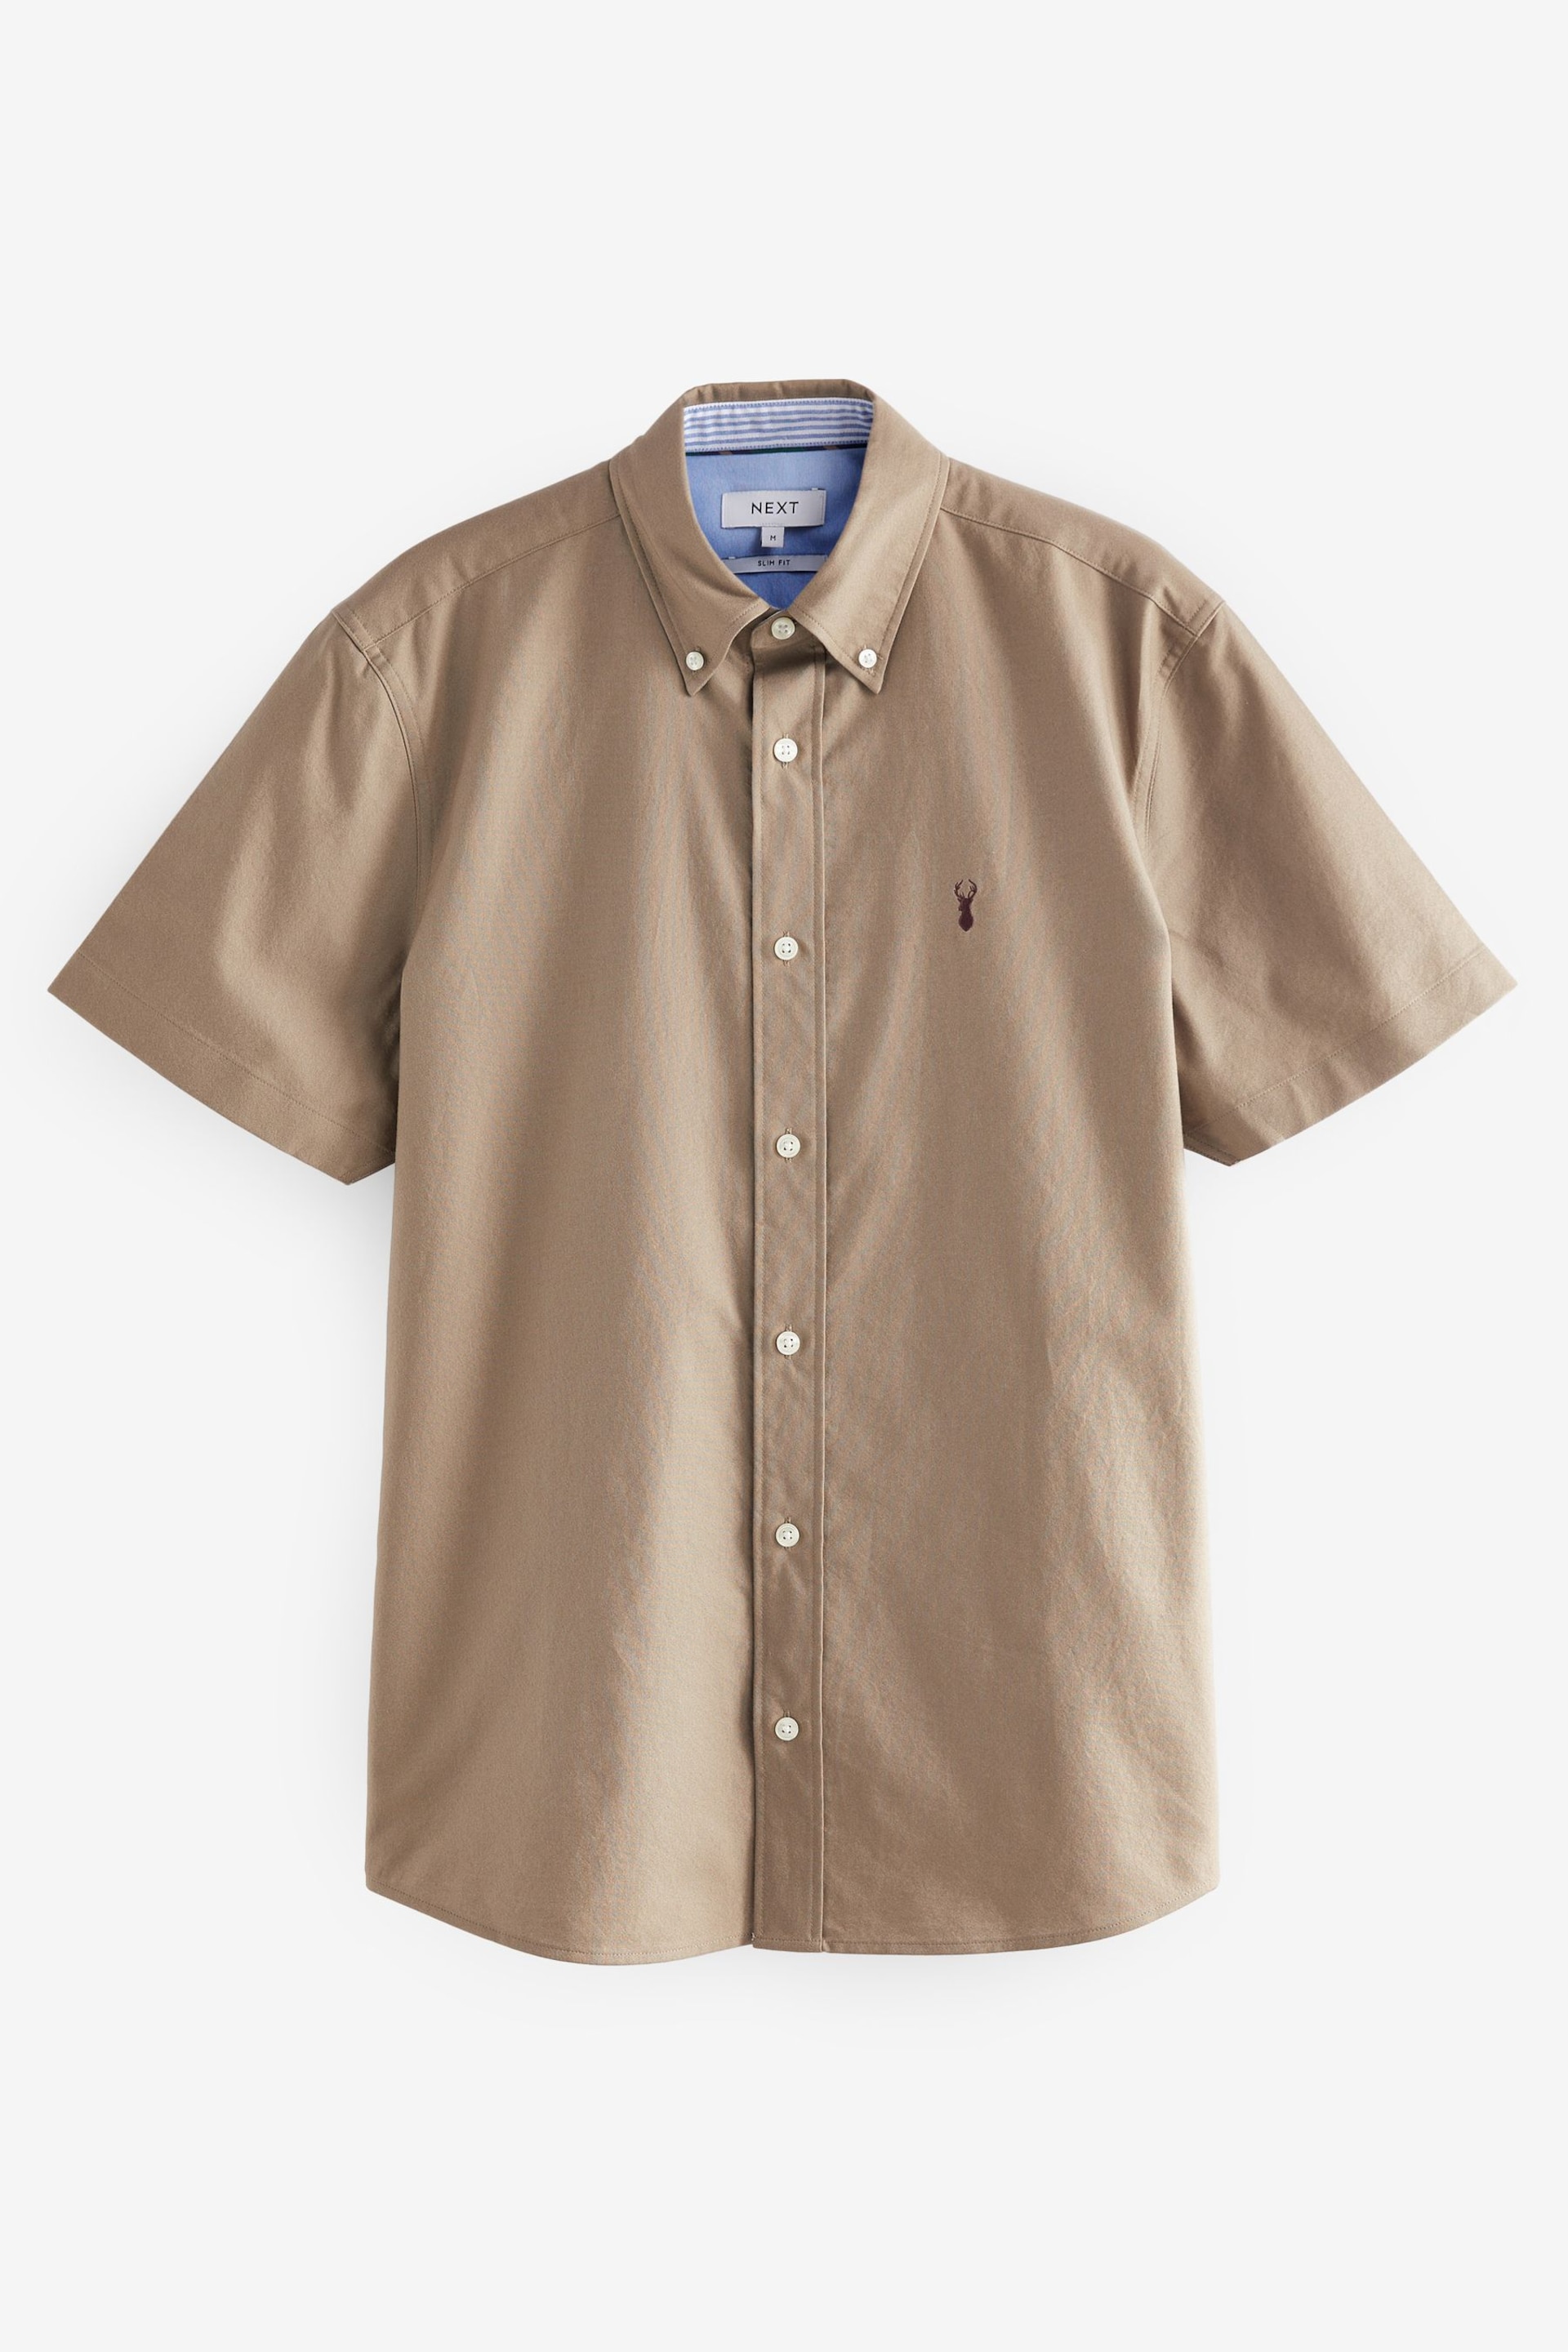 Stone Natural Slim Fit Short Sleeve Oxford Shirt - Image 6 of 6